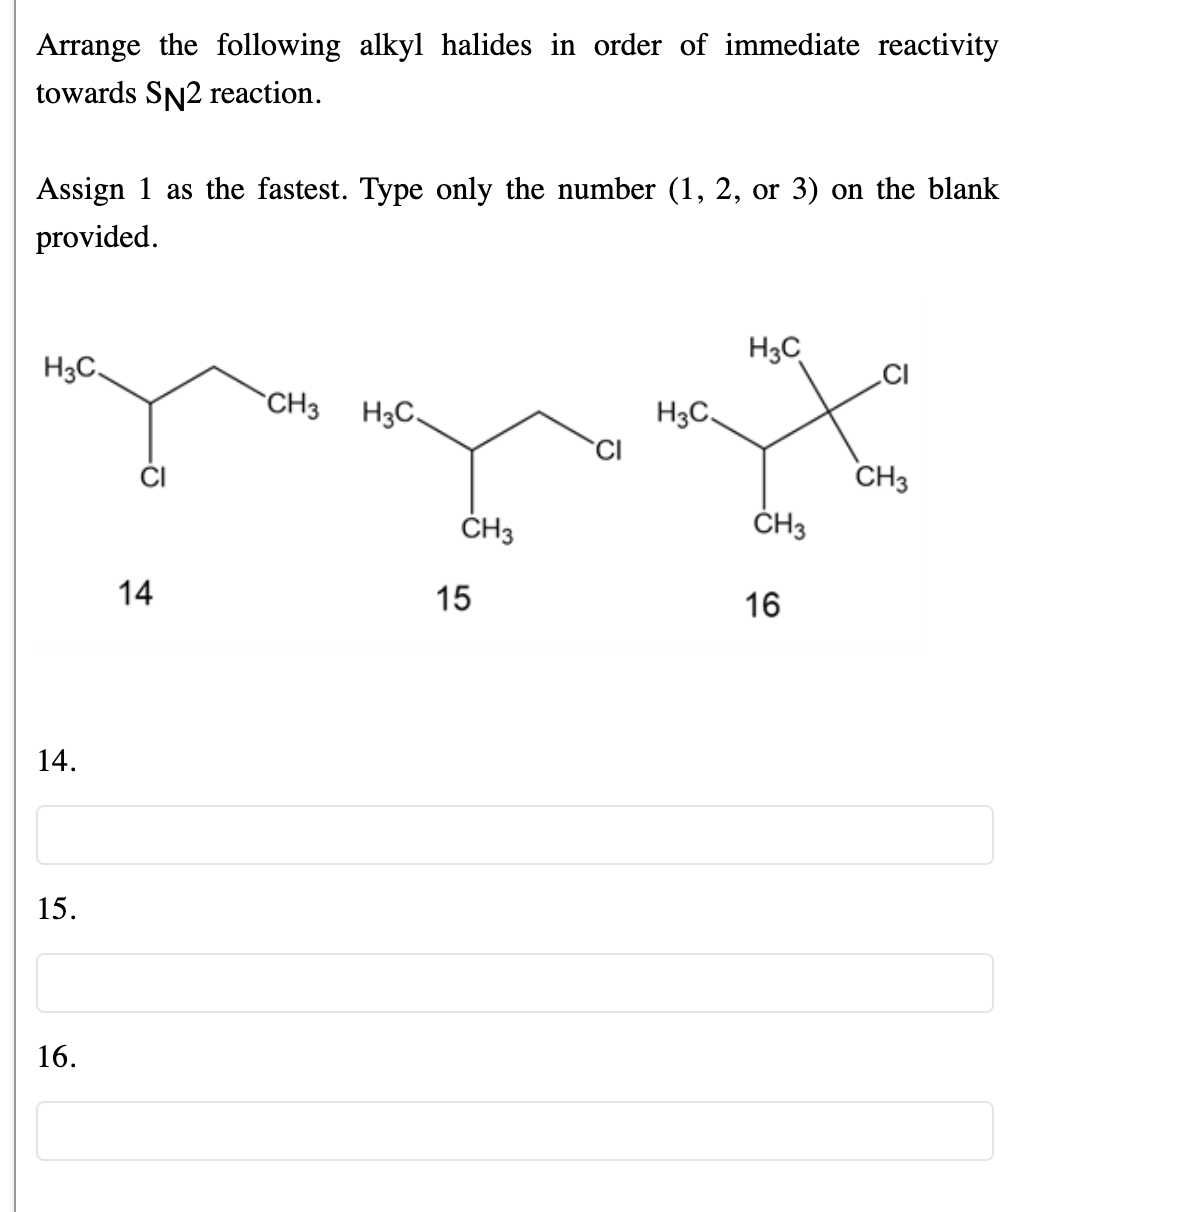 Arrange the following alkyl halides in order of immediate reactivity
towards SN2 reaction.
Assign 1 as the fastest. Type only the number (1, 2, or 3) on the blank
provided.
H3C
H3C.
CI
CH3
H3C.
H3C.
CH3
ČH3
ČH3
14
15
16
14.
15.
16.
